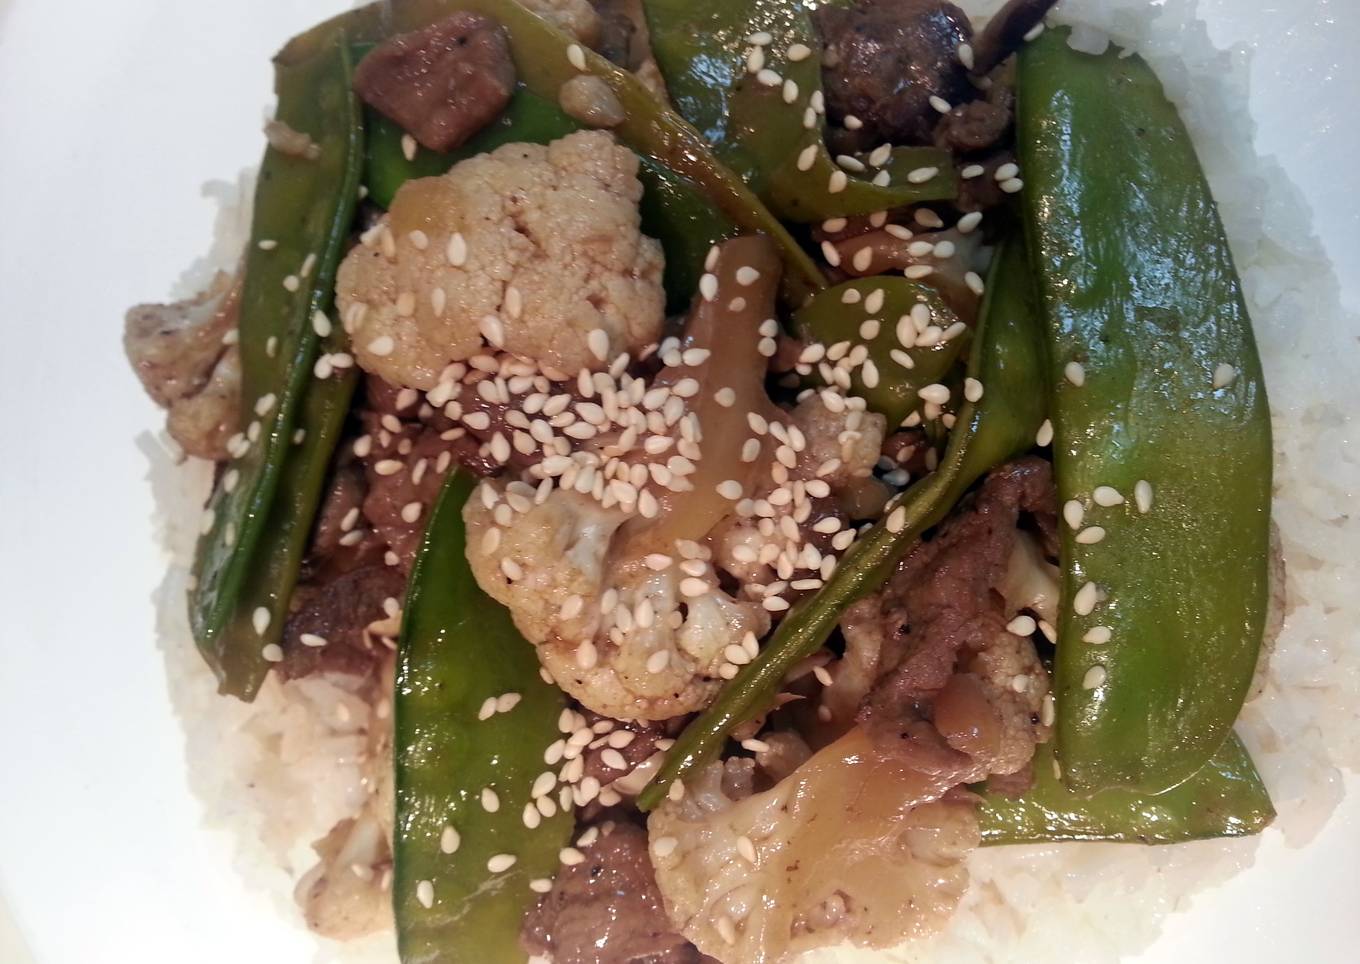 Sonia's Beef with Cauliflower and Snow Peas?